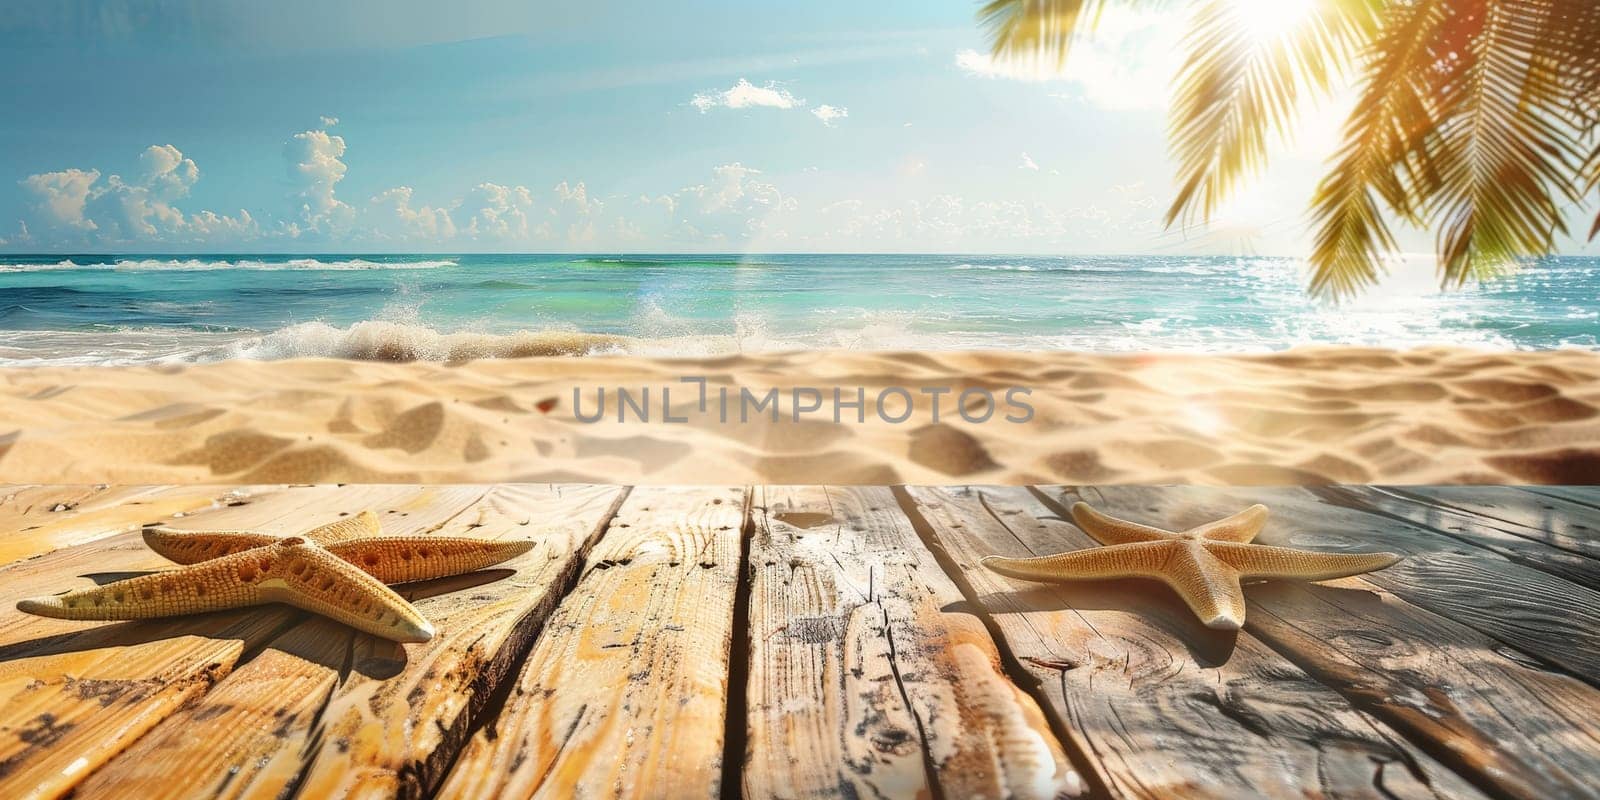 A beach scene with two starfish on a wooden board. Scene is peaceful and relaxing, as it captures a moment of tranquility at the beach